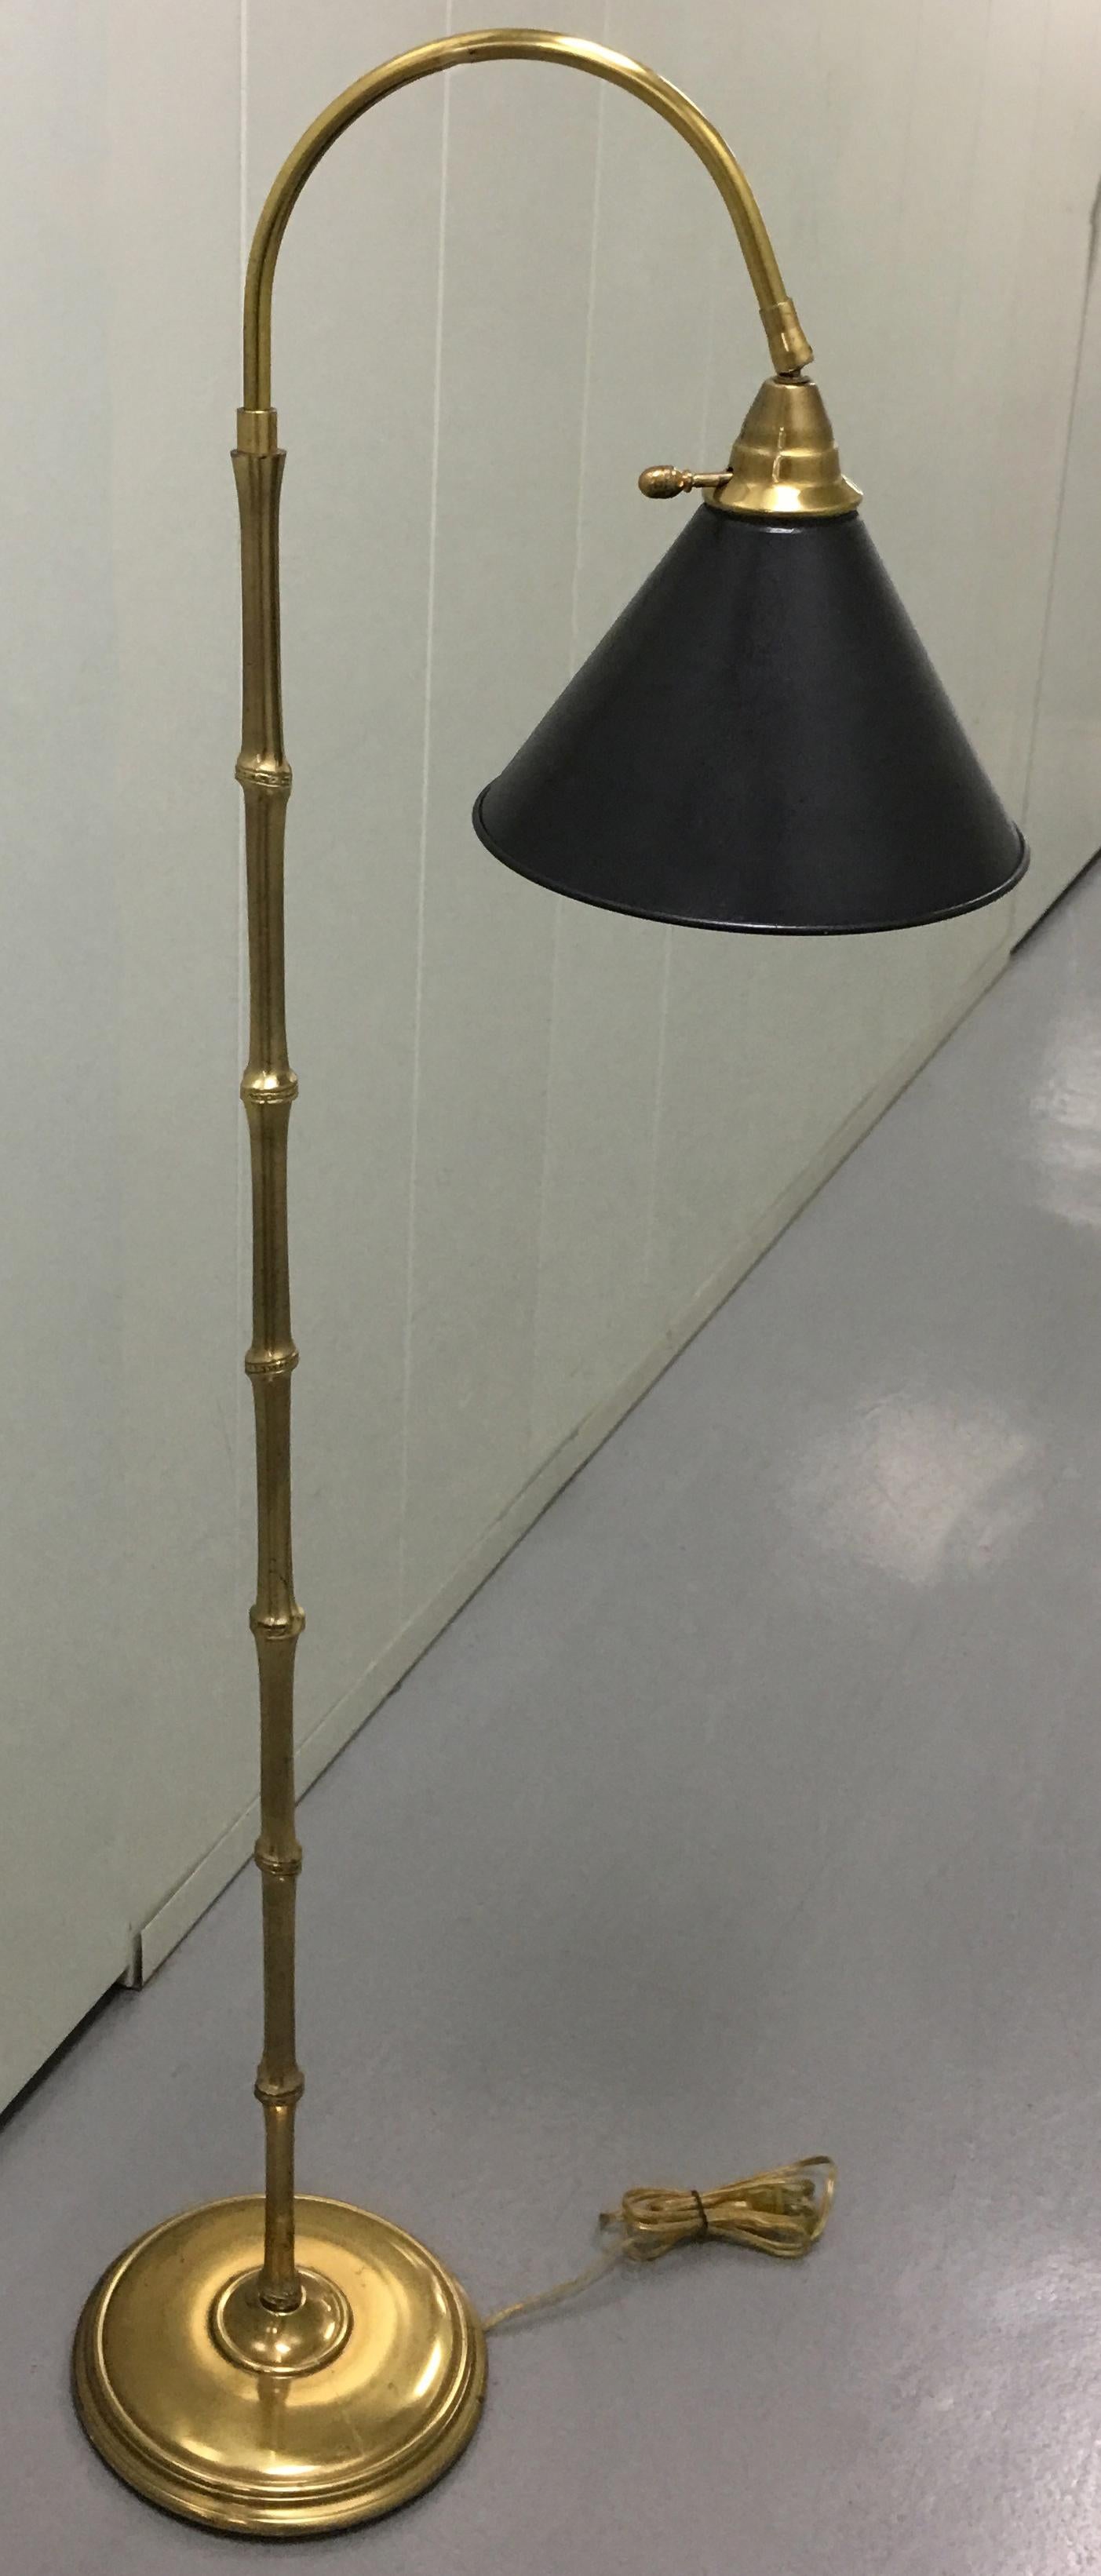 Pair of brass bamboo style floor lamps with back tole shade. Newly rewired. Each lamp takes one standard bulb.